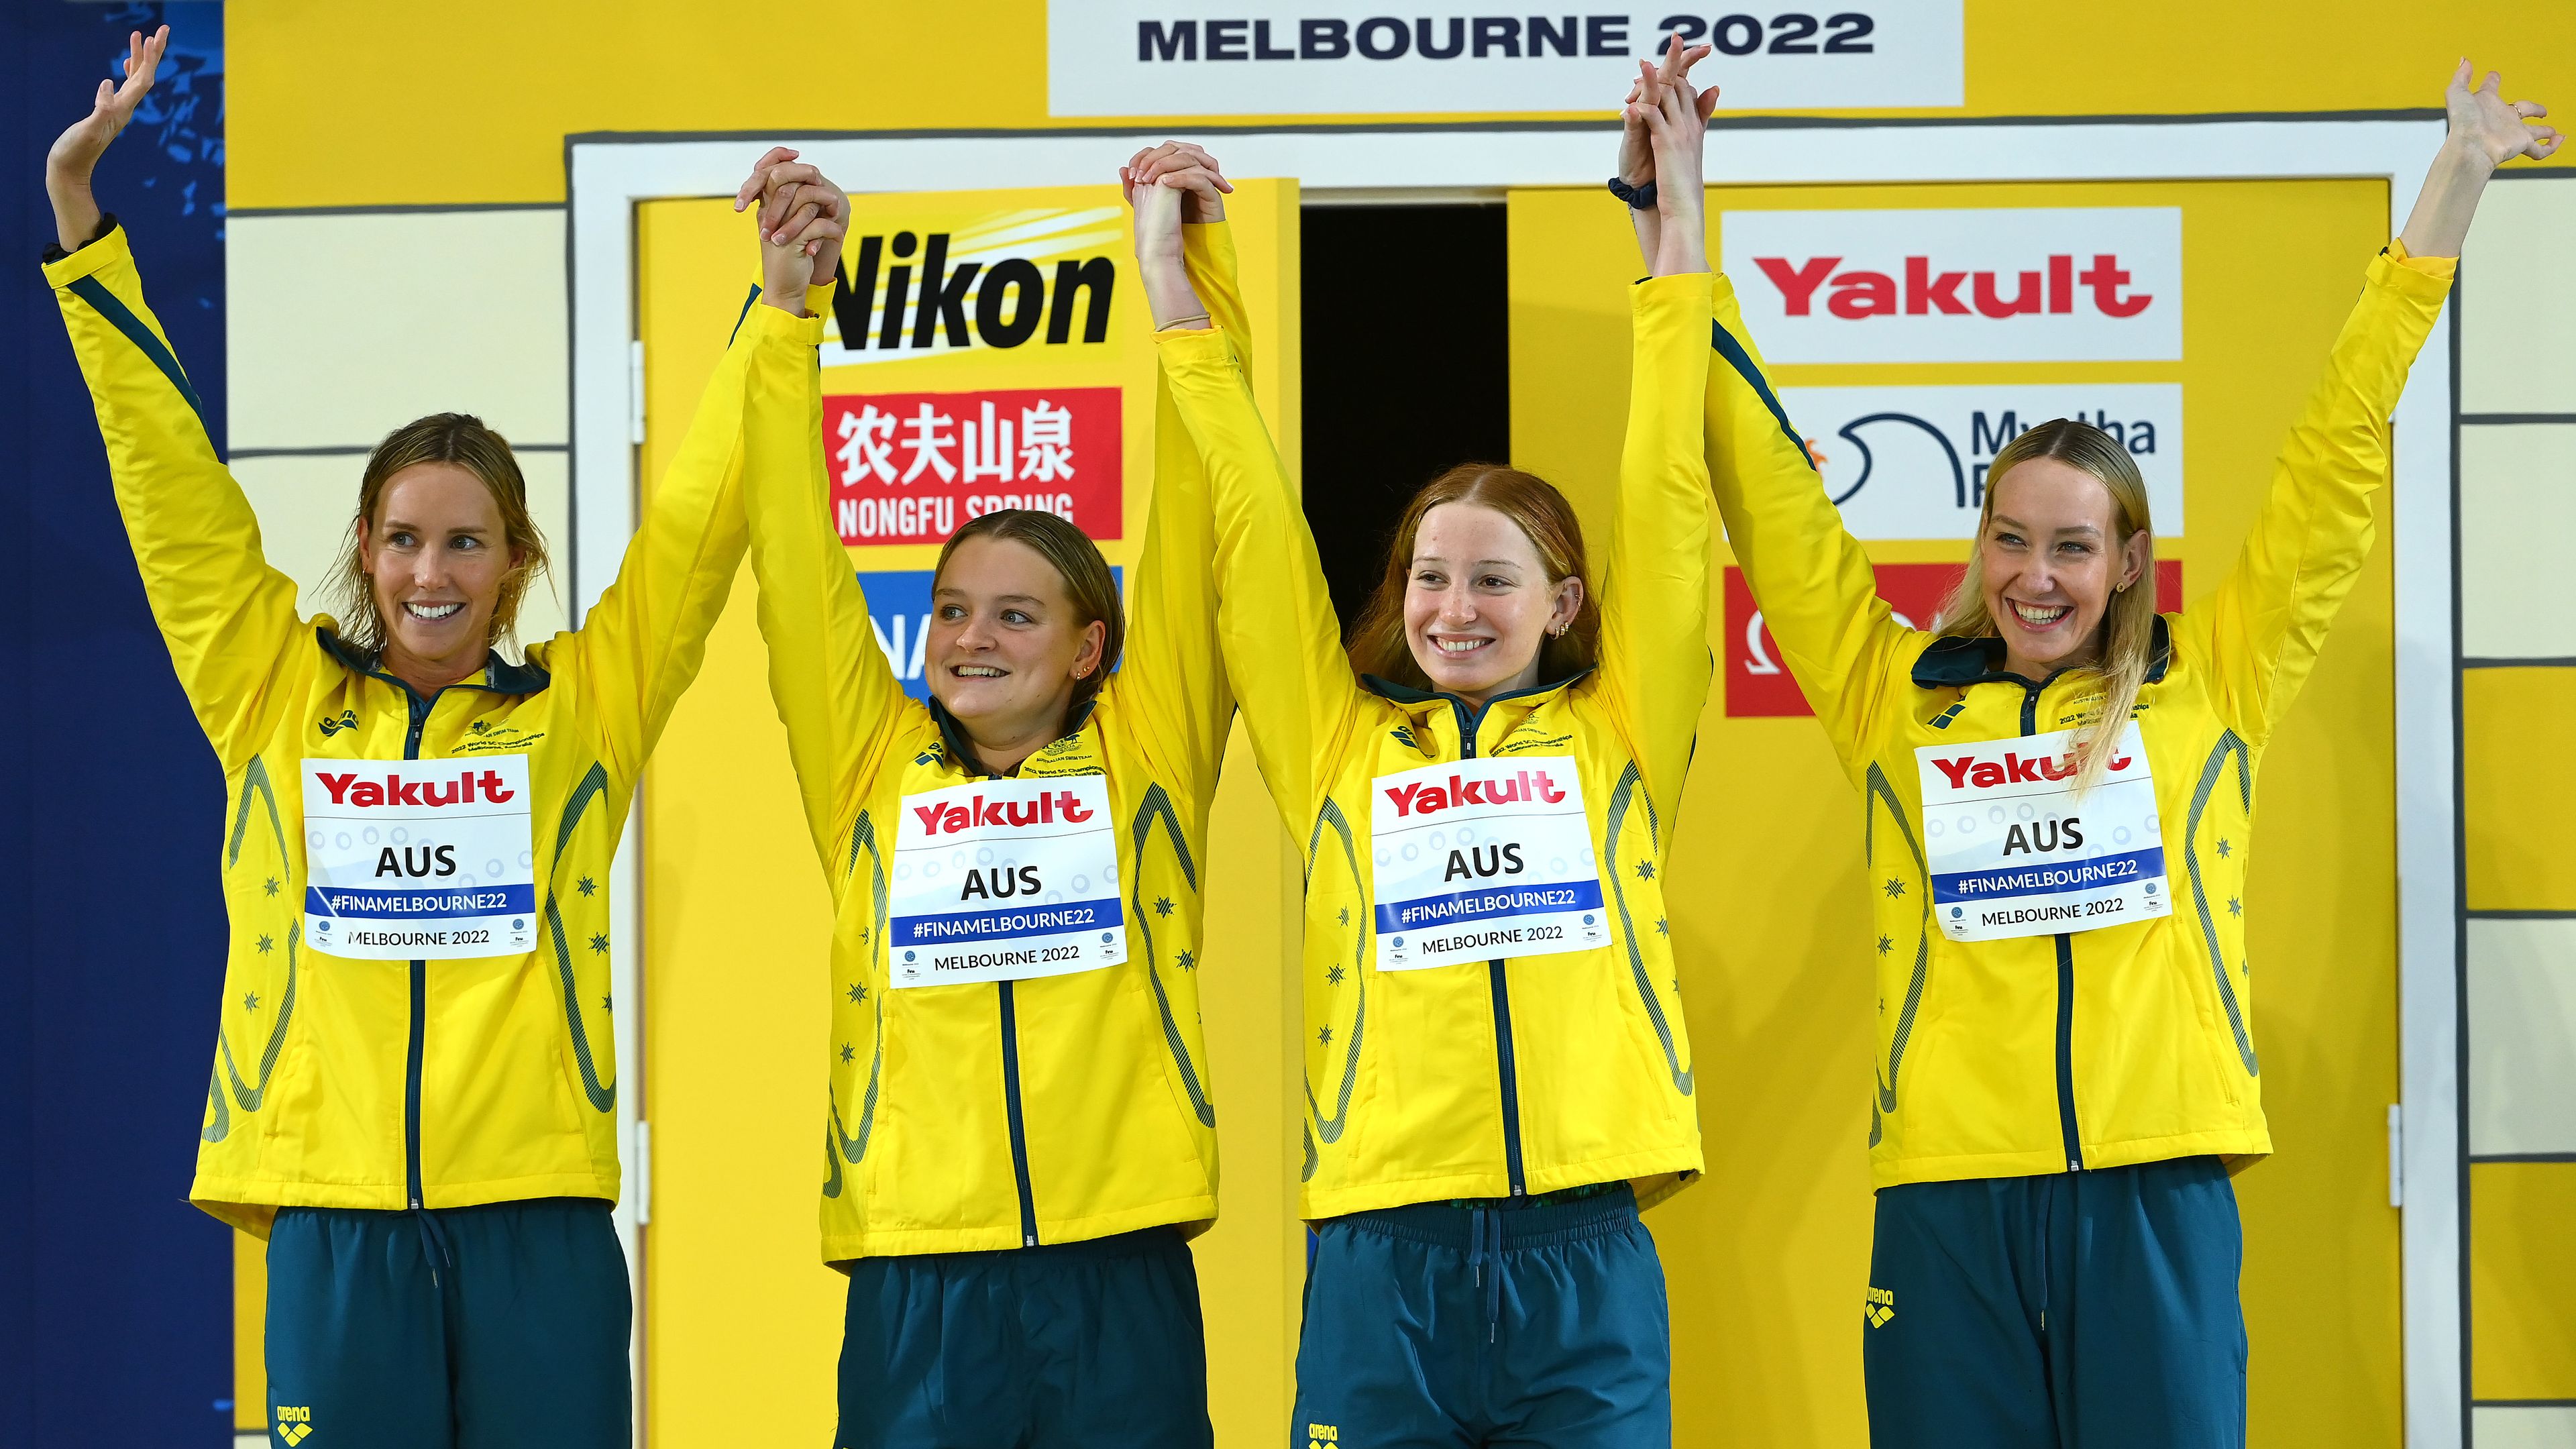 Gold medallists Emma McKeon, Chelsea Hodges, Mollie O&#x27;Callaghan and Madison Wilson celebrate during the medal ceremony.